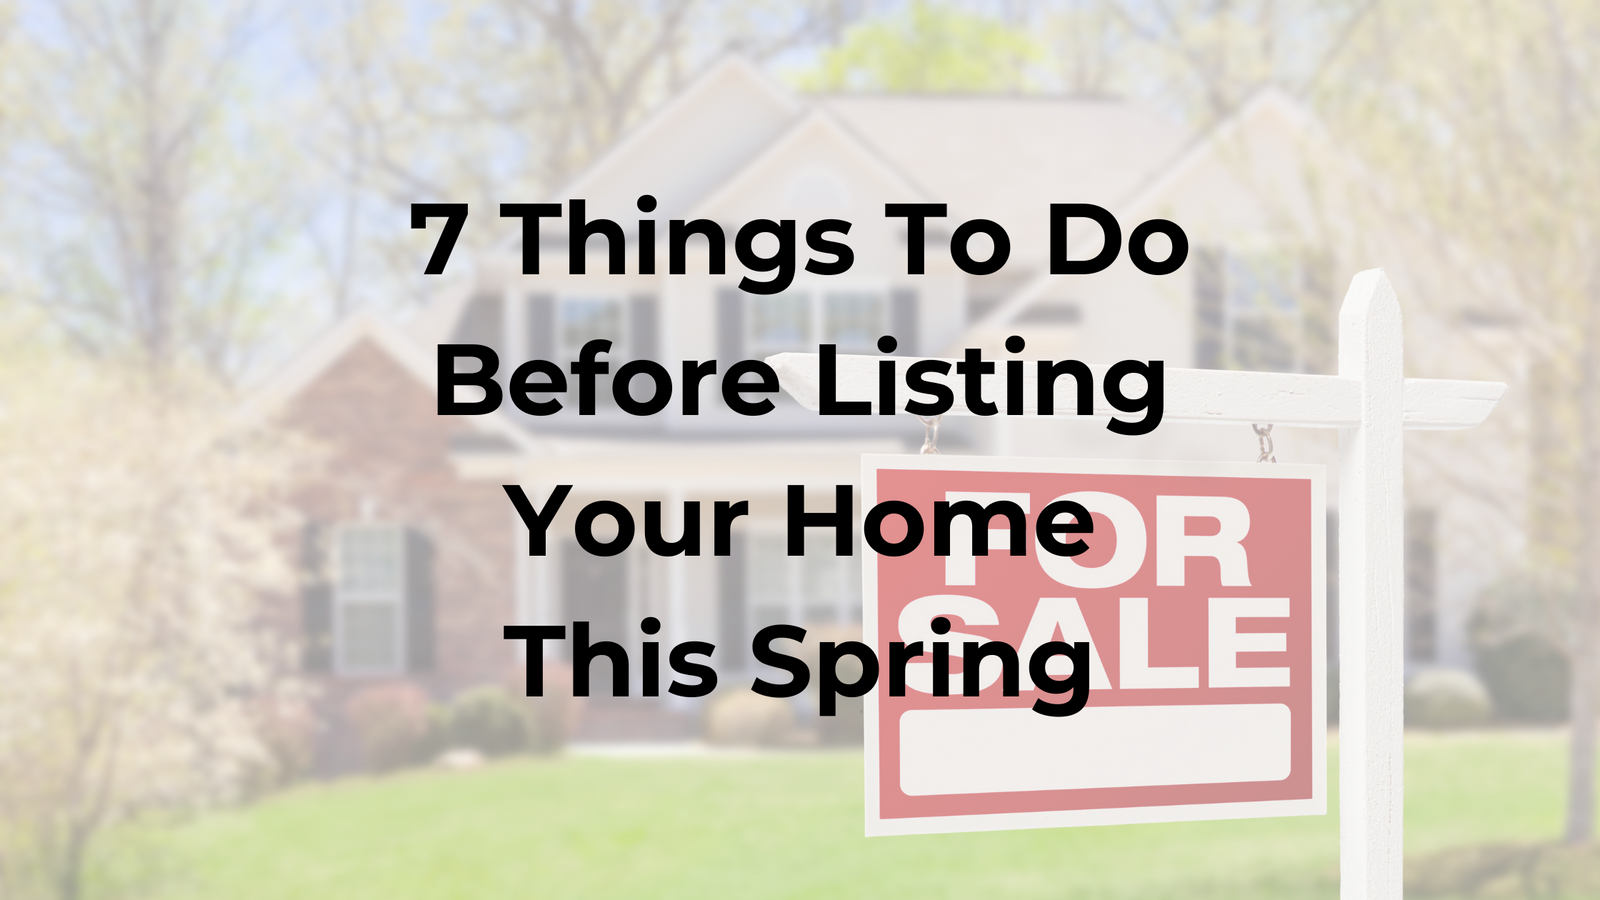 7 Things To Do Before Listing Your Home This Spring